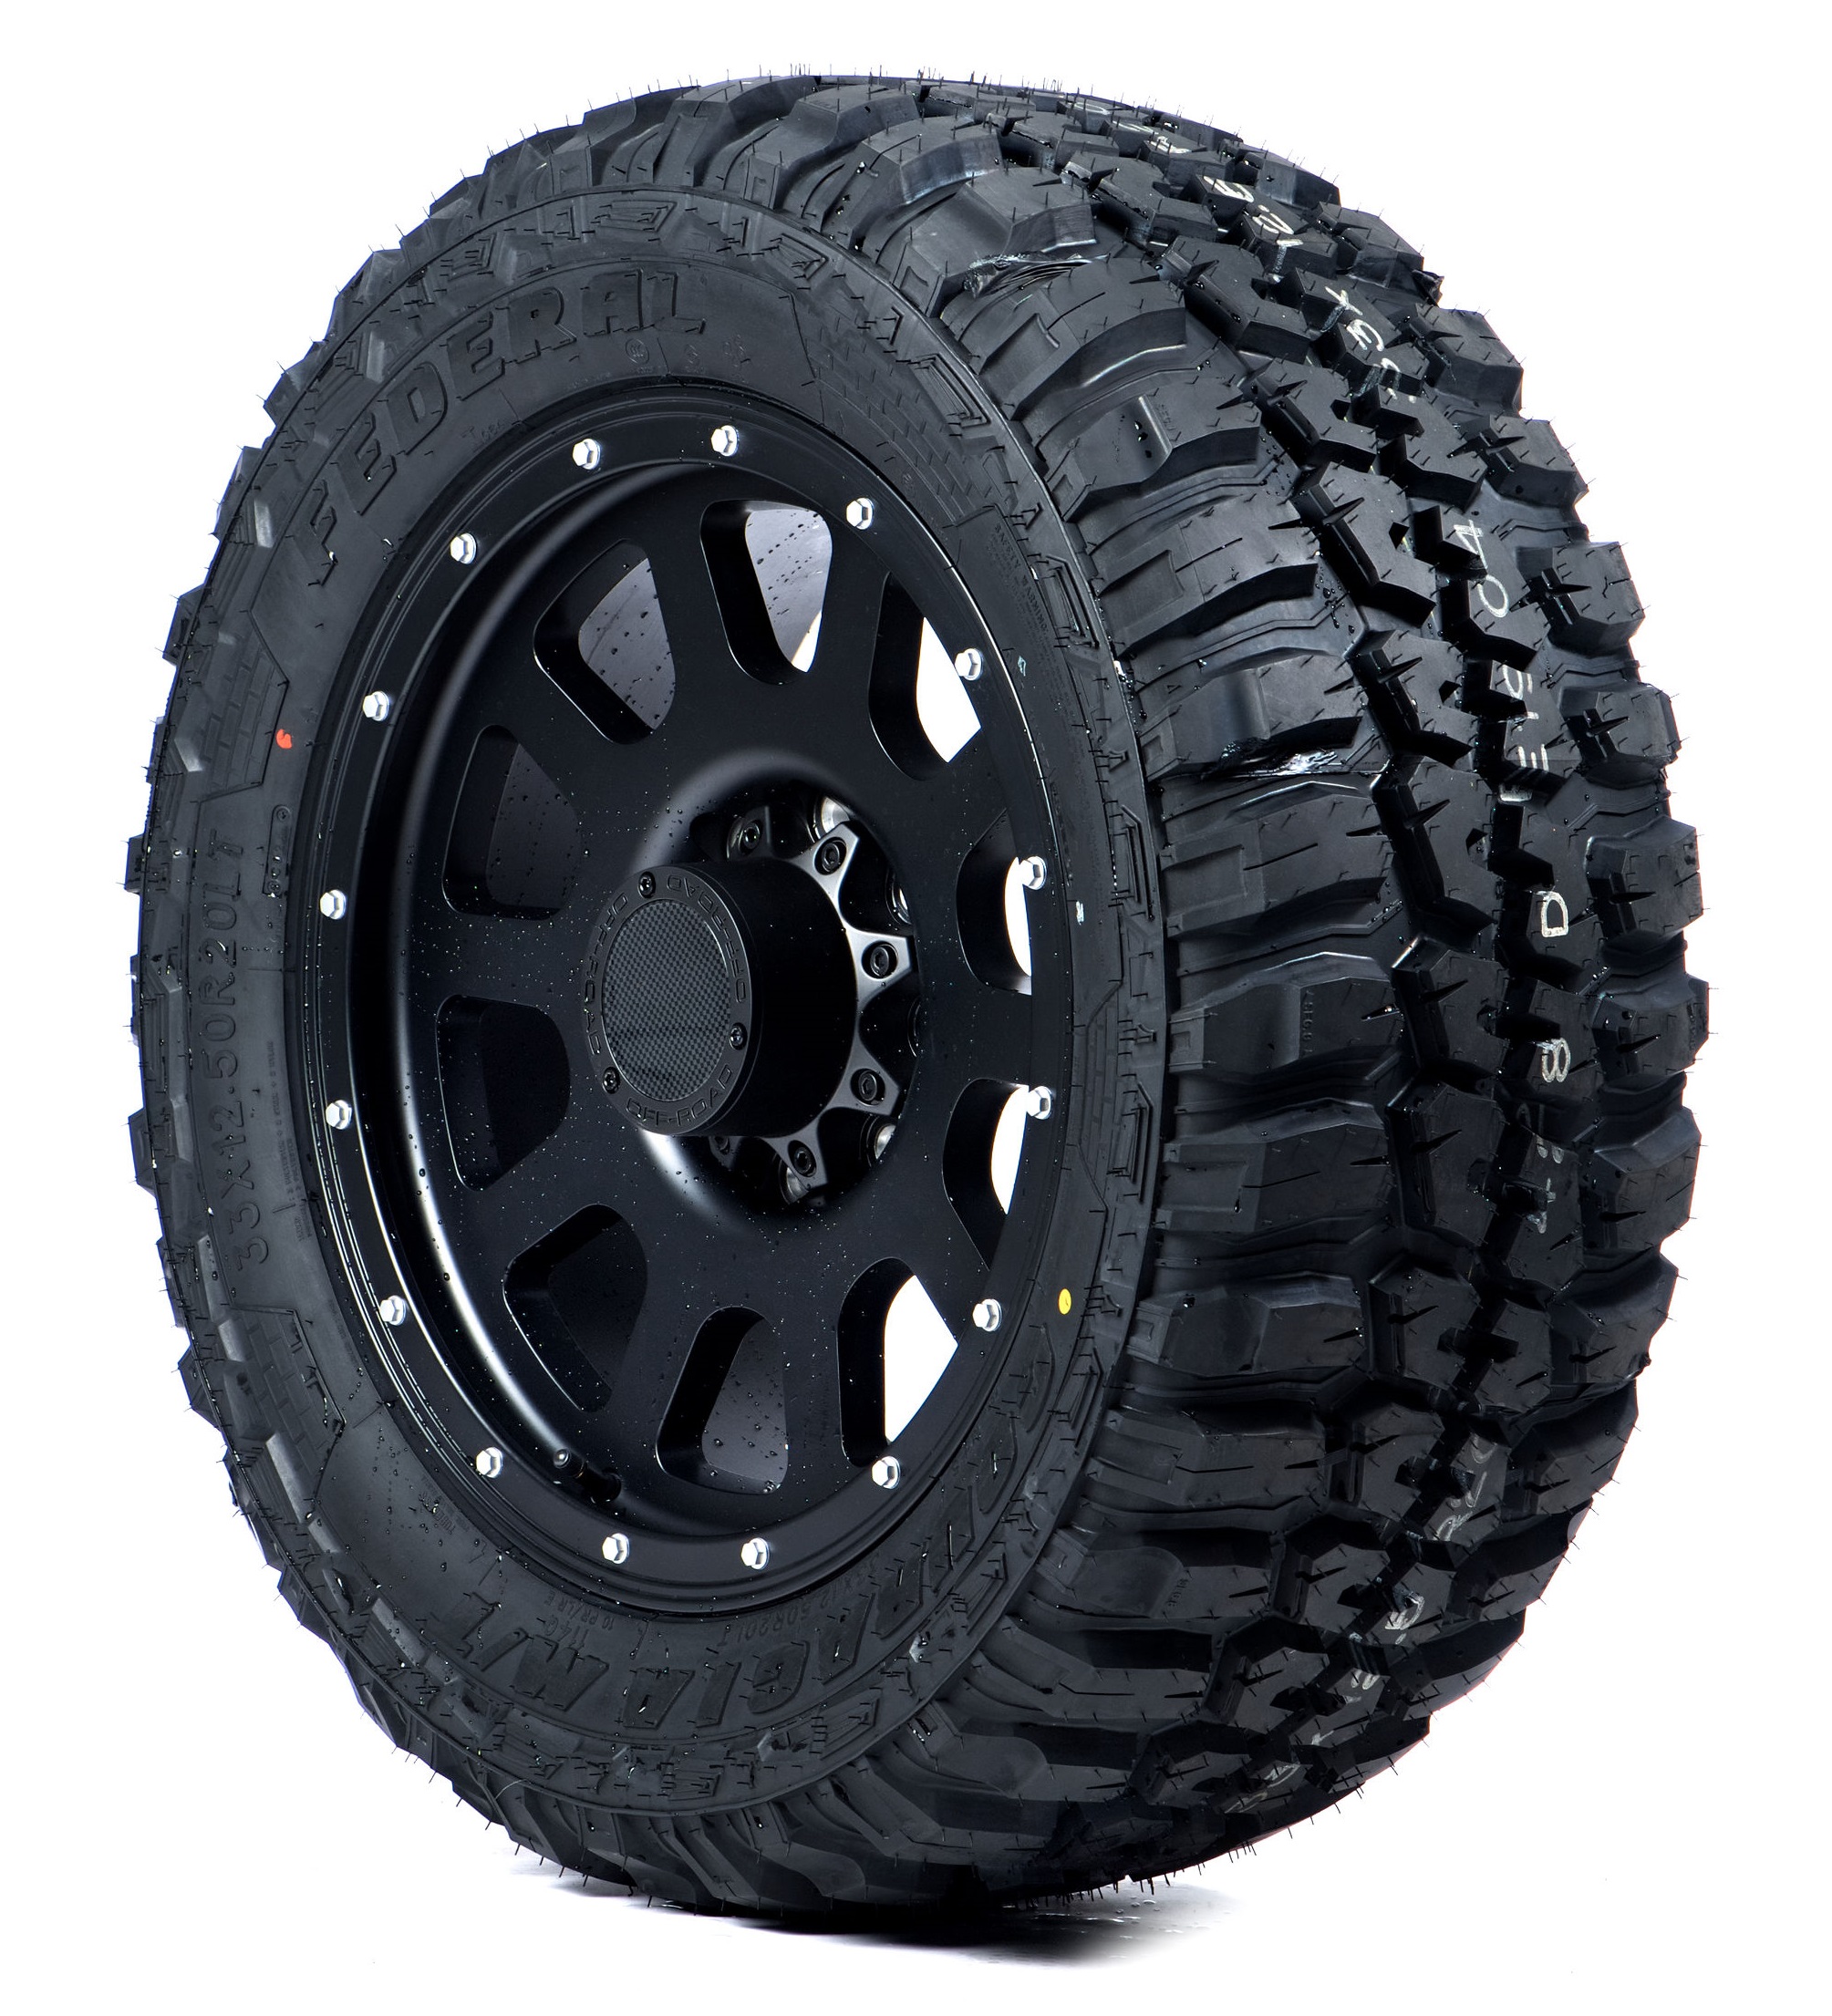 Federal Couragia M/T Mud-Terrain Tire - 33X12.50R20 LRE 10PLY - image 1 of 5